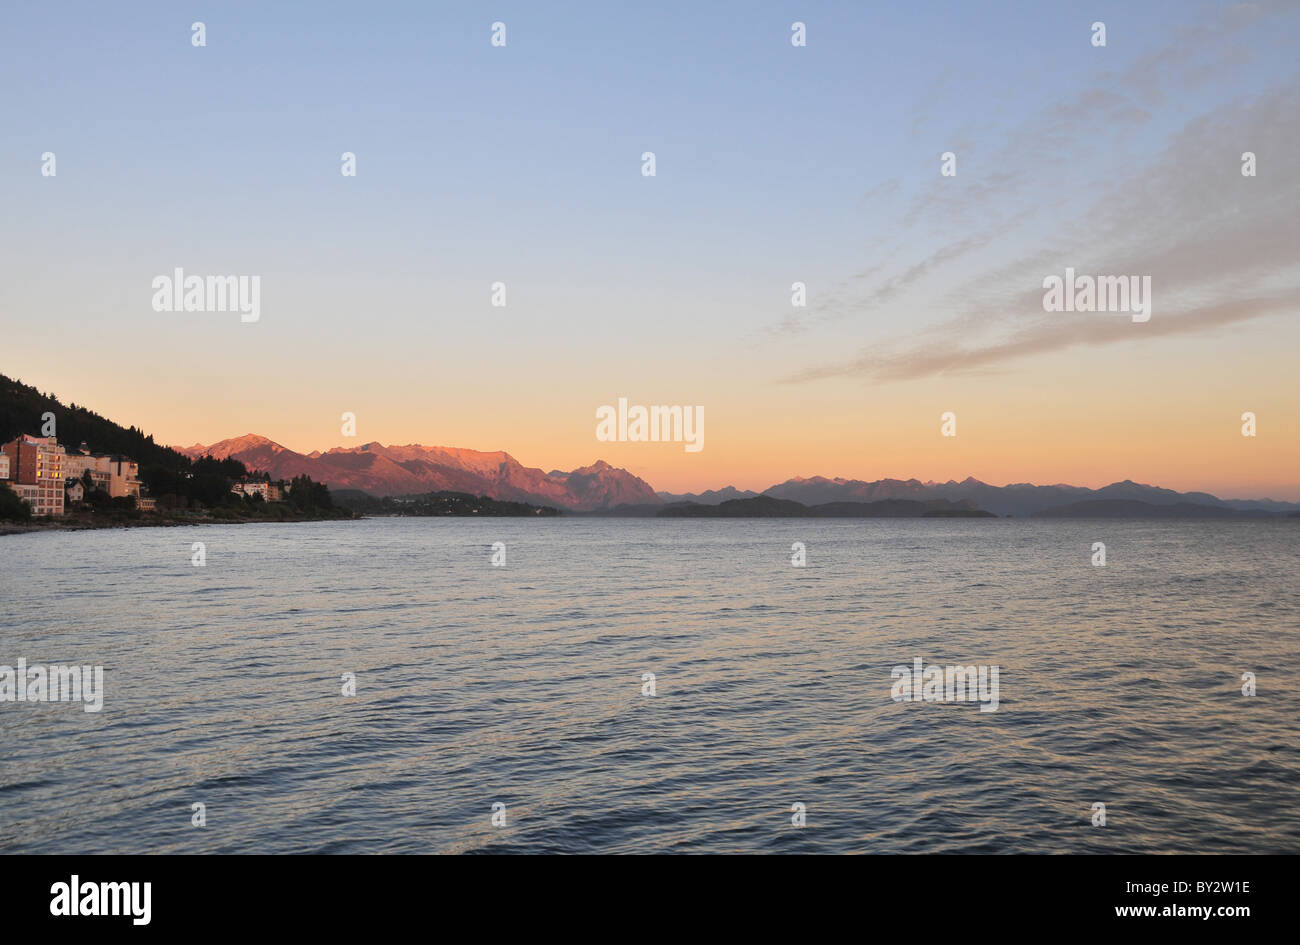 Cerro Lopez and Andean peaks glowing red in morning sunlight across waters of Lake Nahuel Huapi, Bariloche waterfront, Argentina Stock Photo